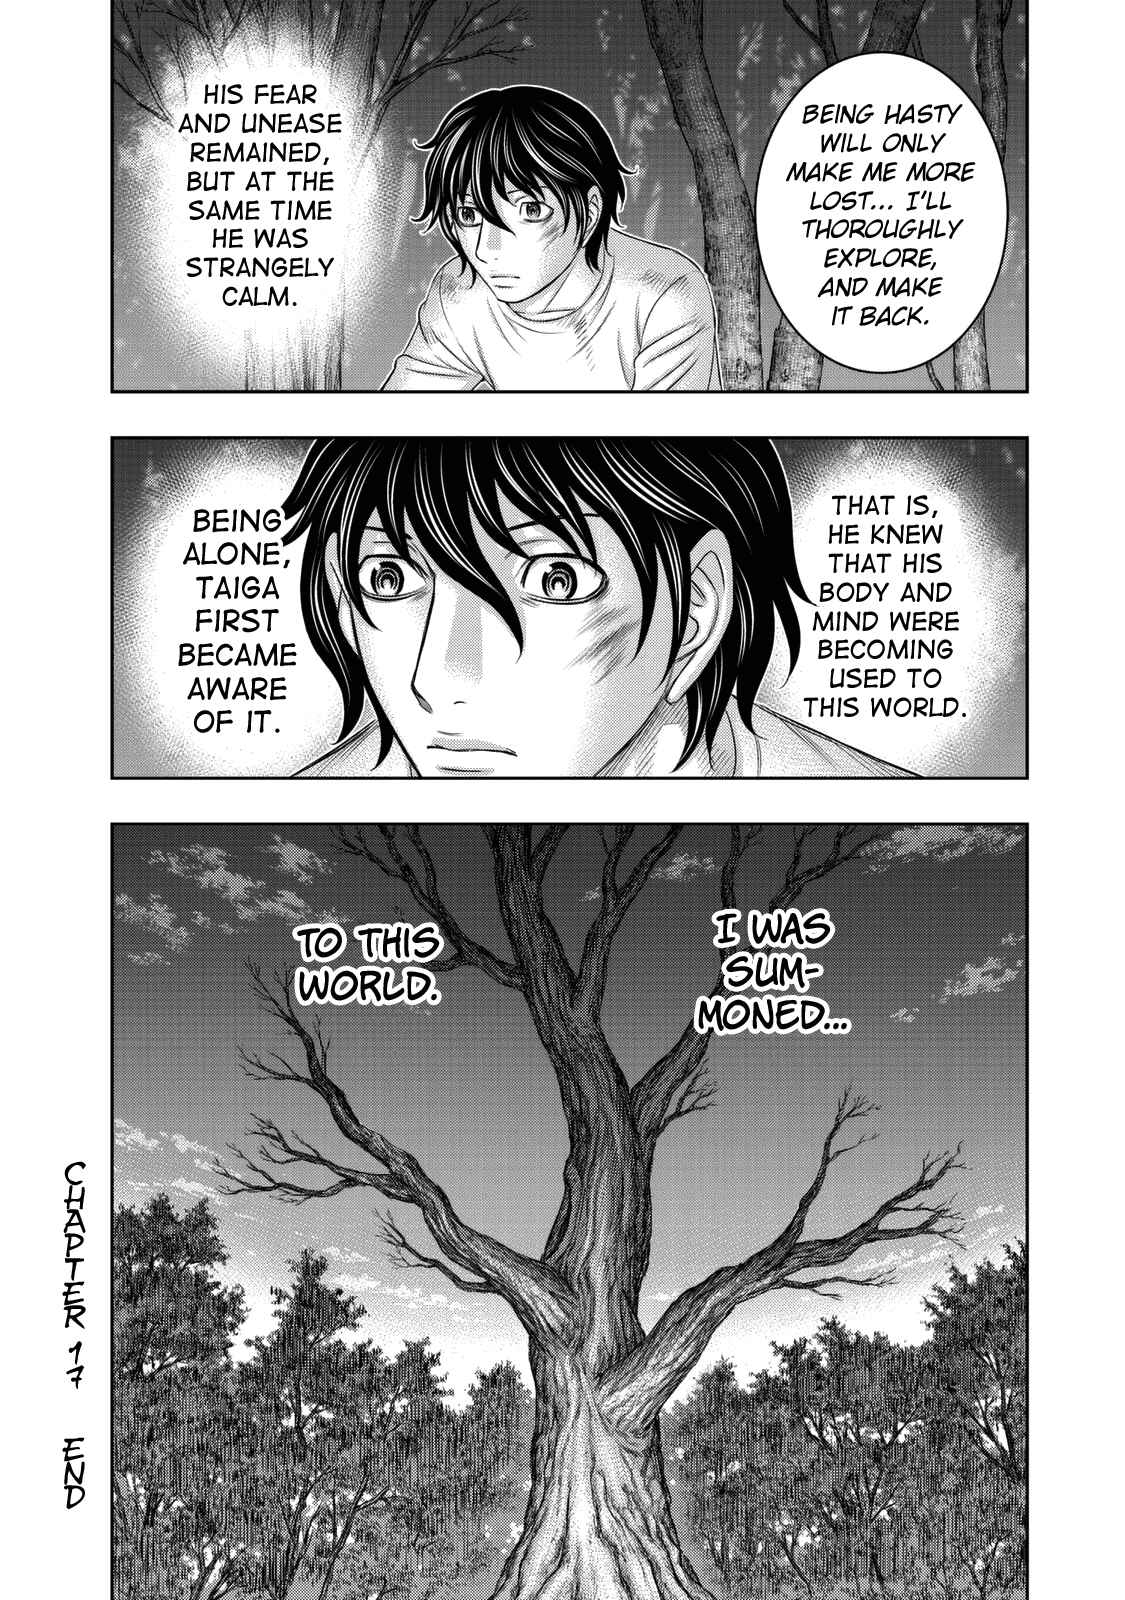 Sousei no Taiga Vol. 2 Ch. 17 The Summoned One